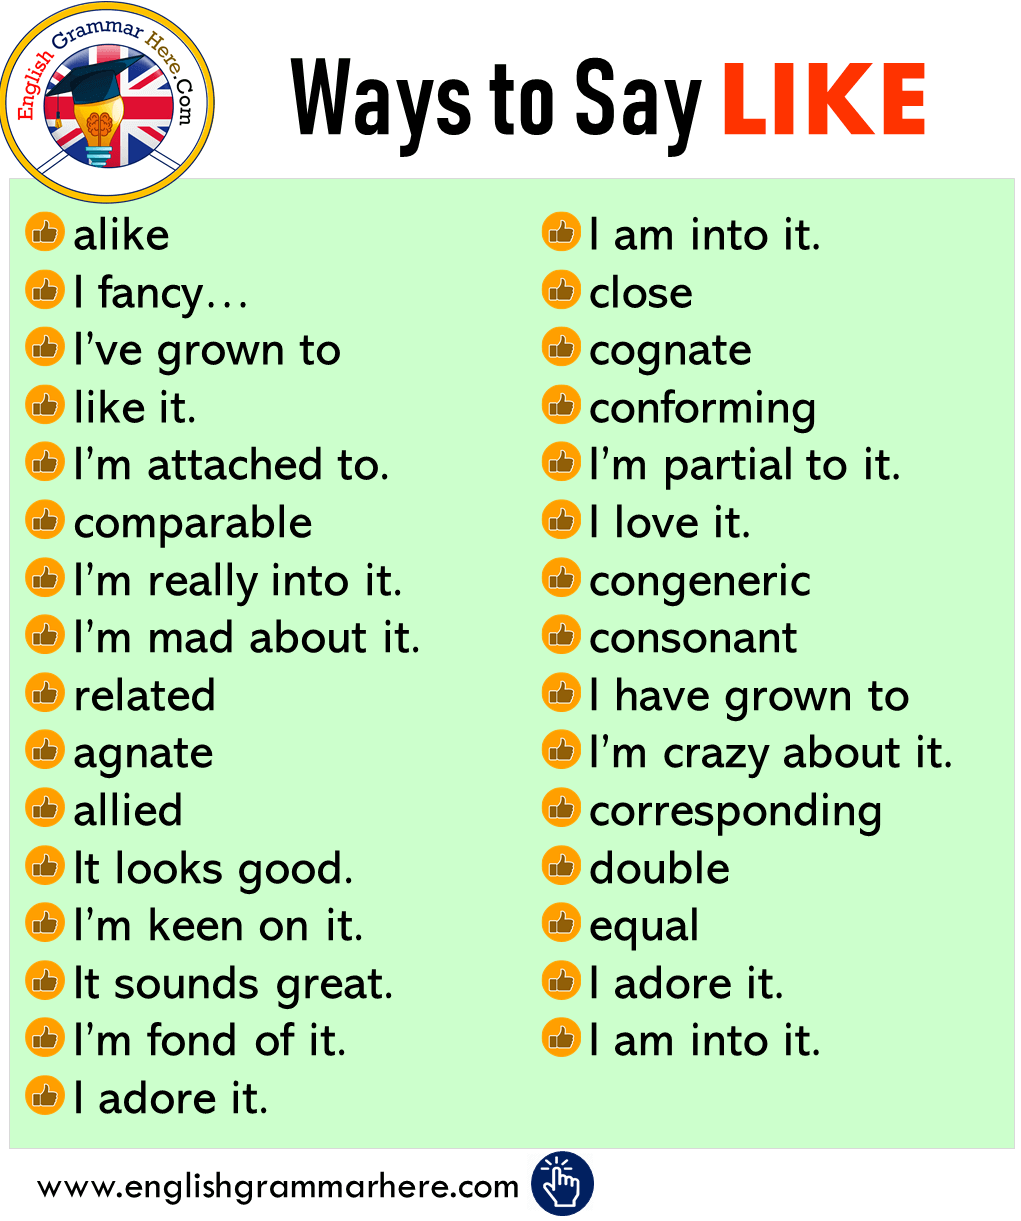 Other Ways to Say LIKE in English